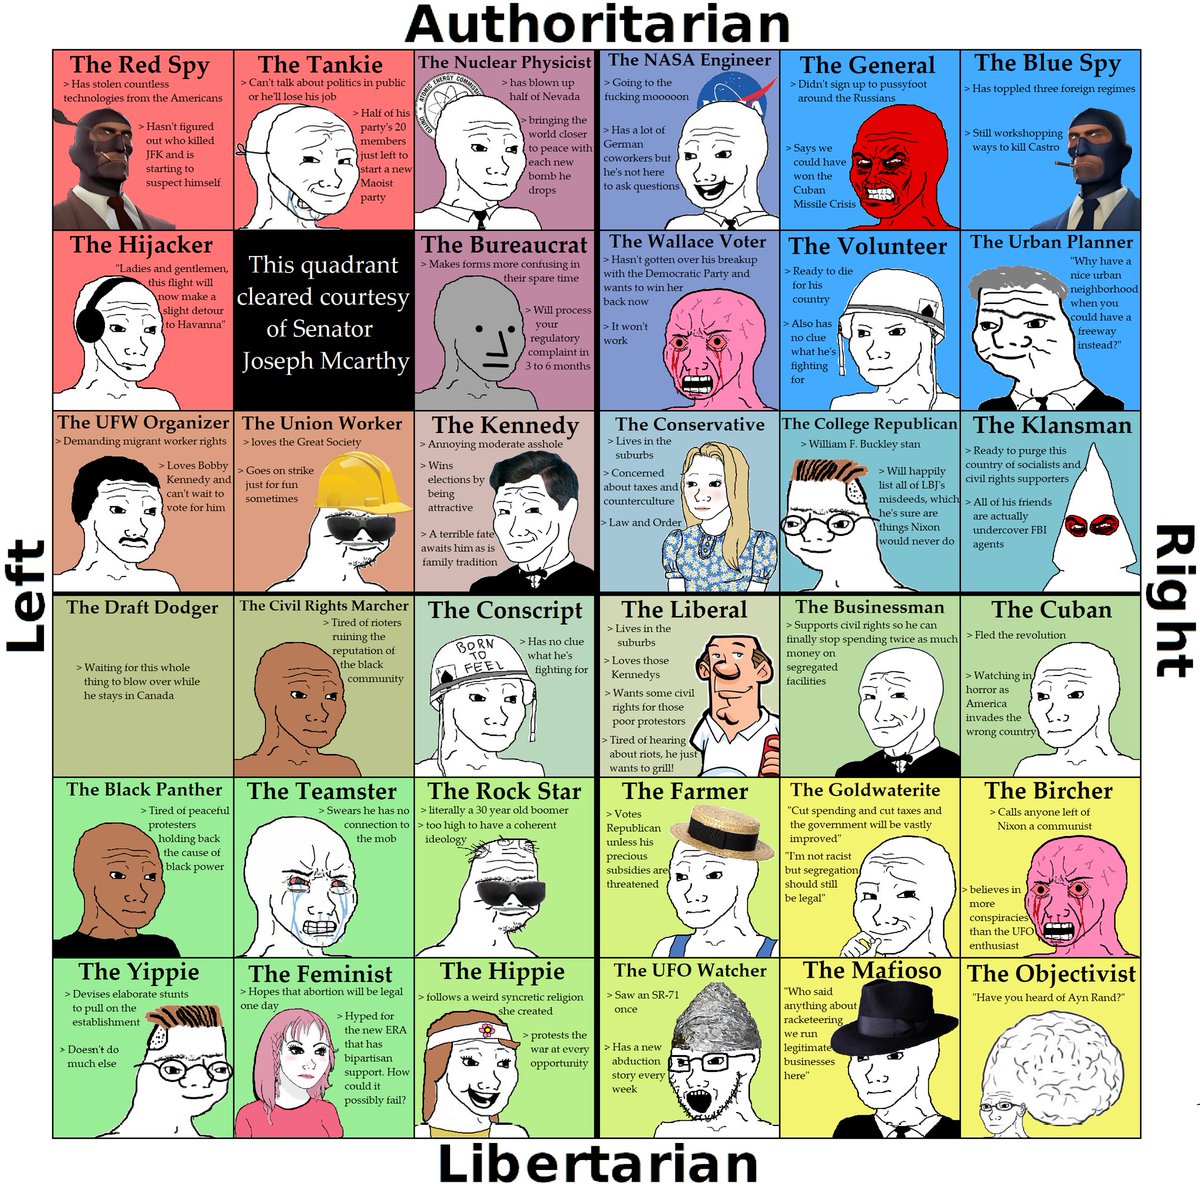 1960s US political compass
Which one are you?